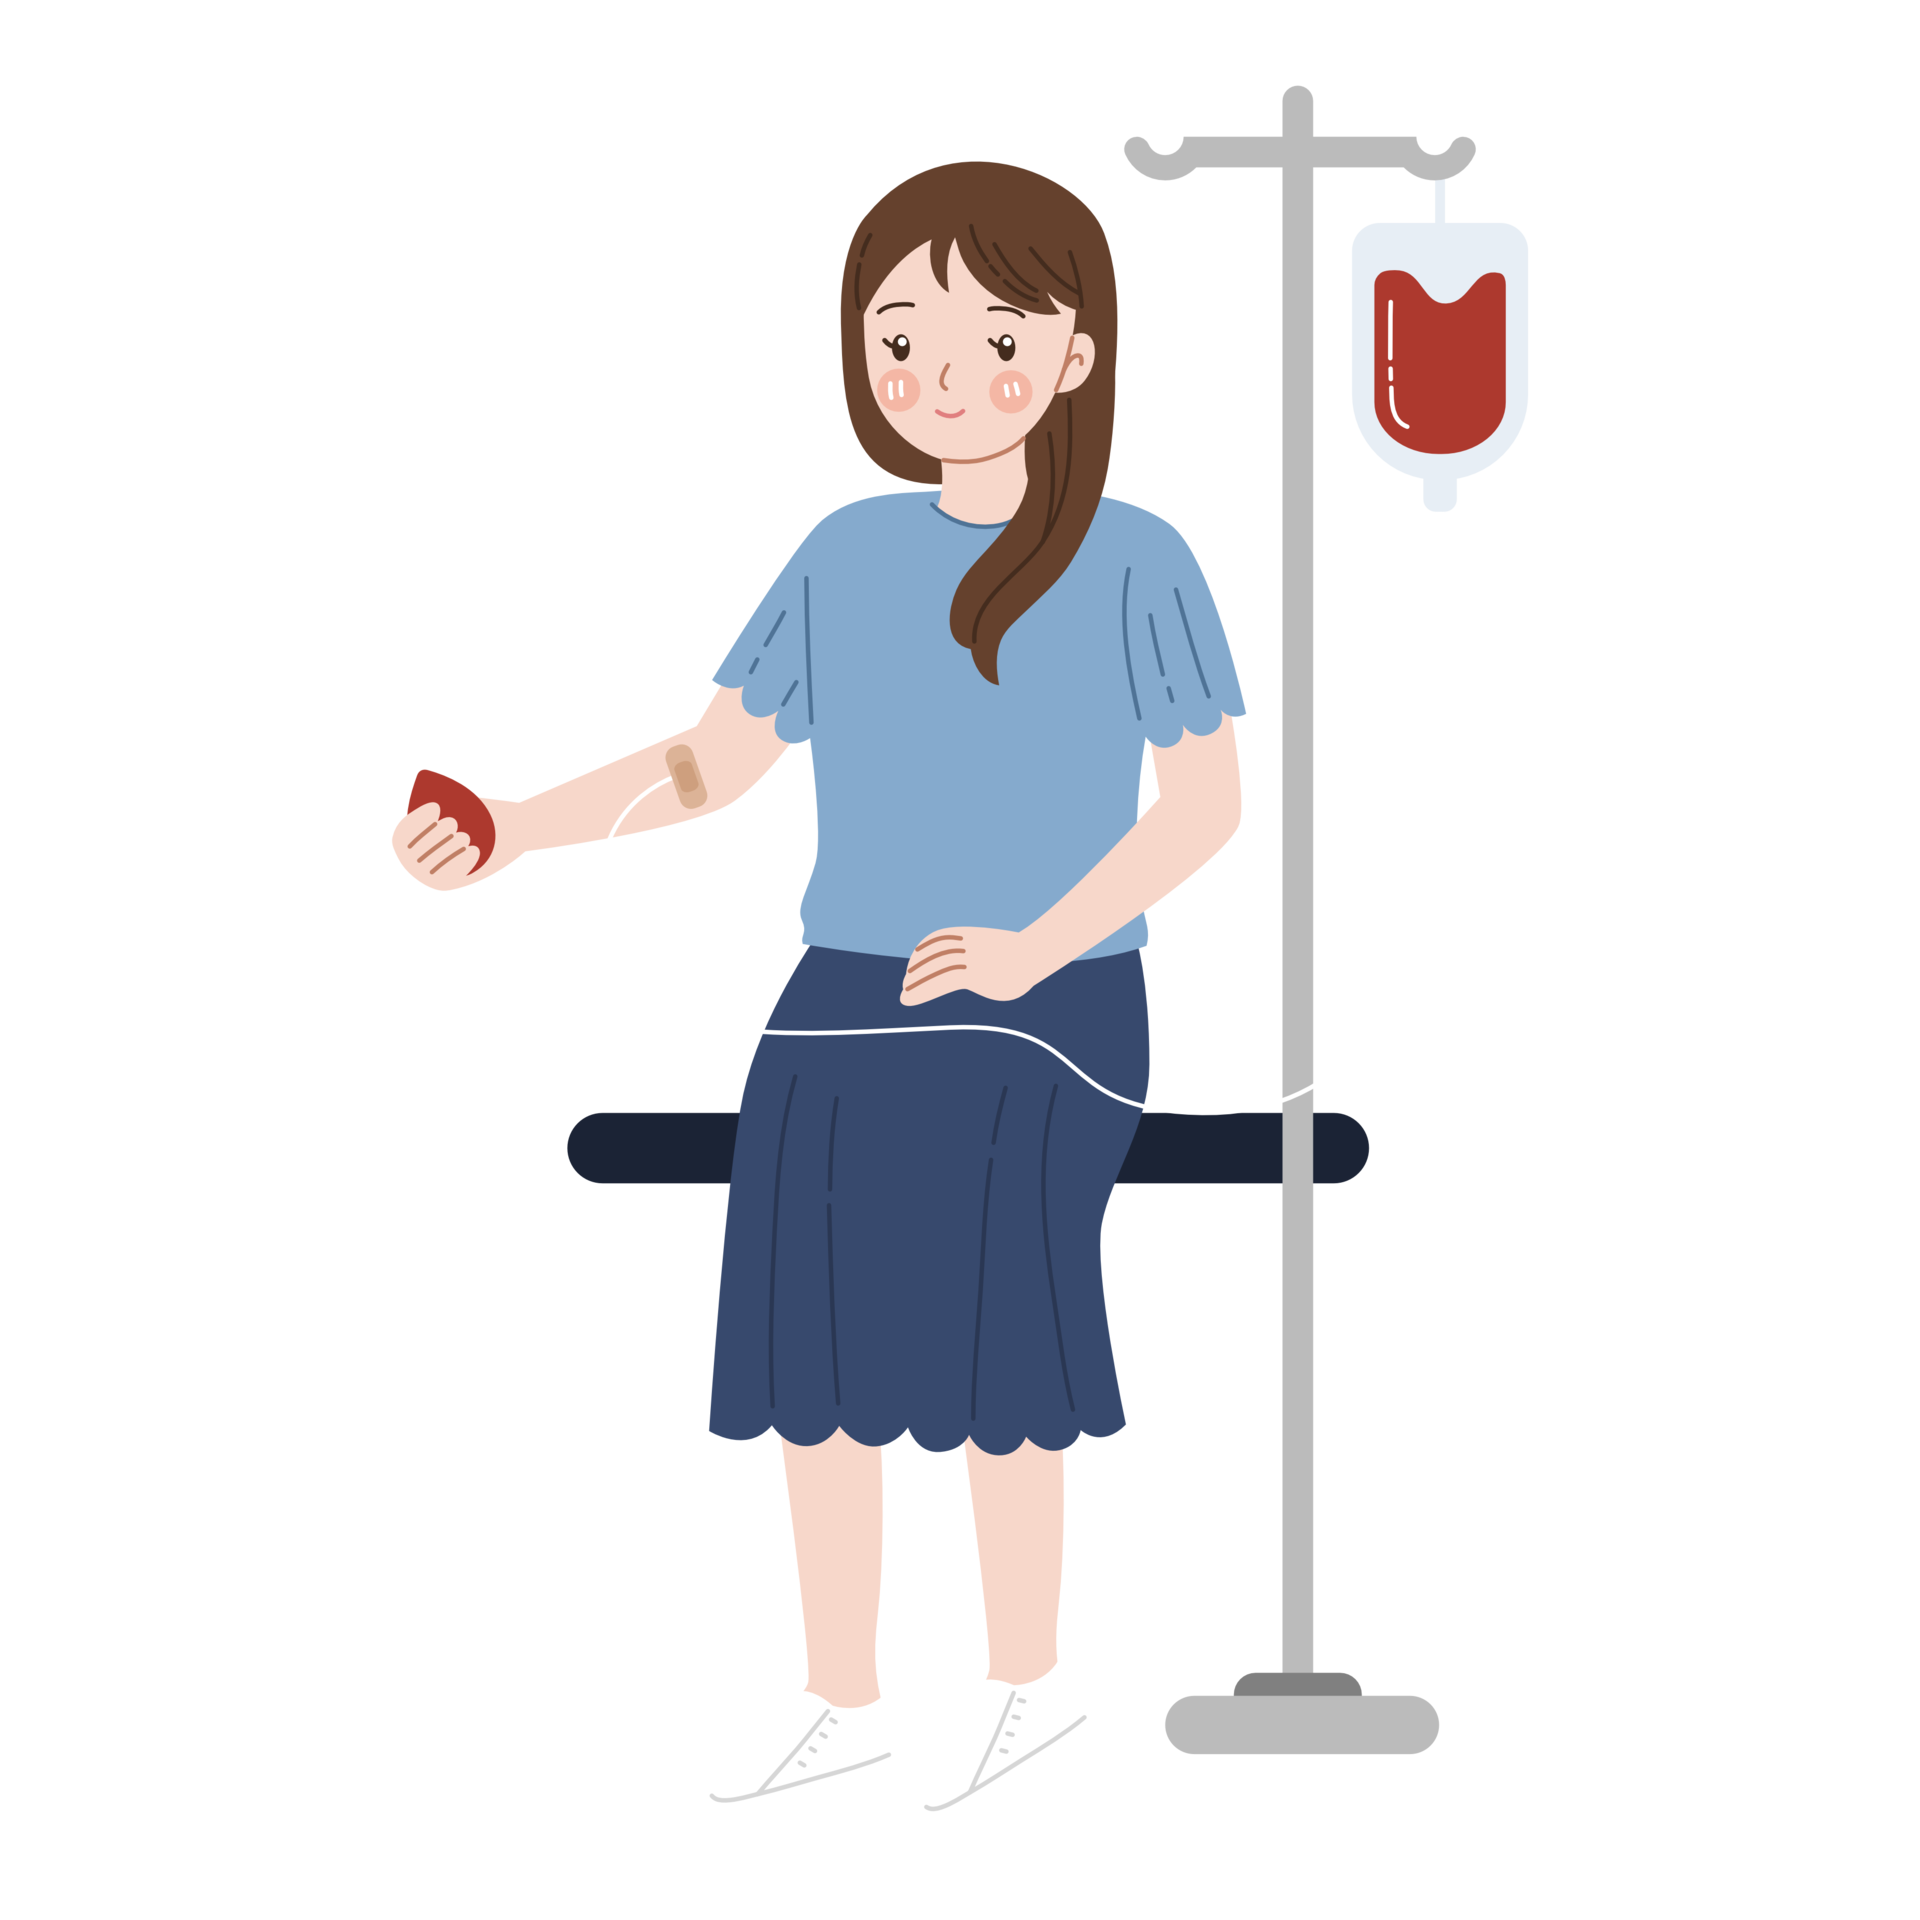 donate blood cartoon character illustration 24553384 PNG